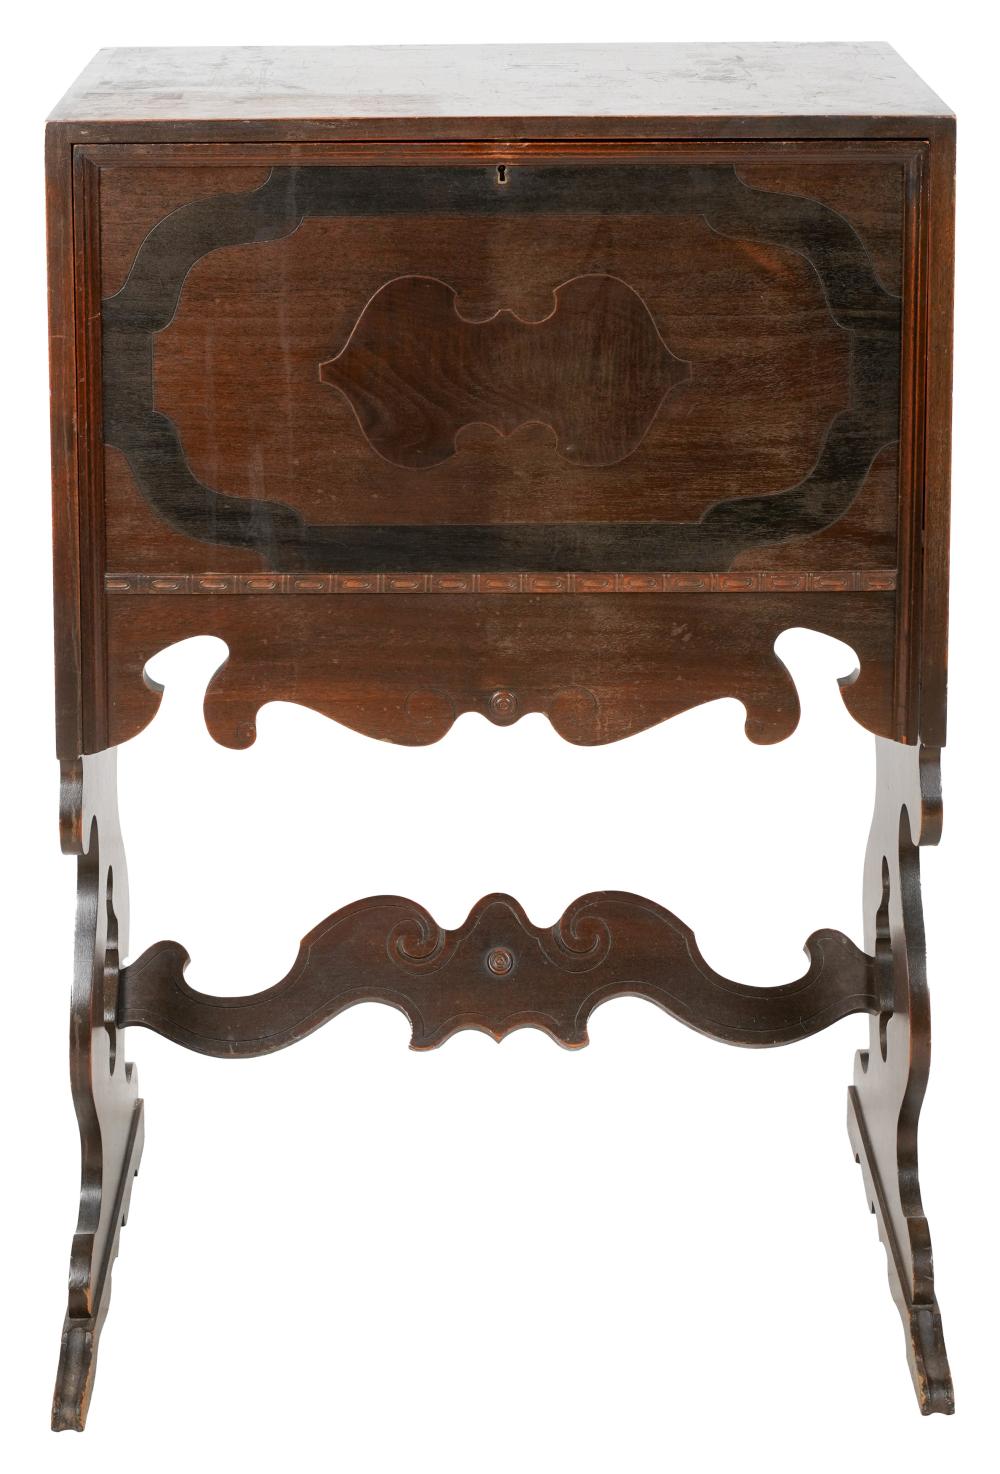 BAROQUE STYLE INLAID FALL FRONT 3011d4